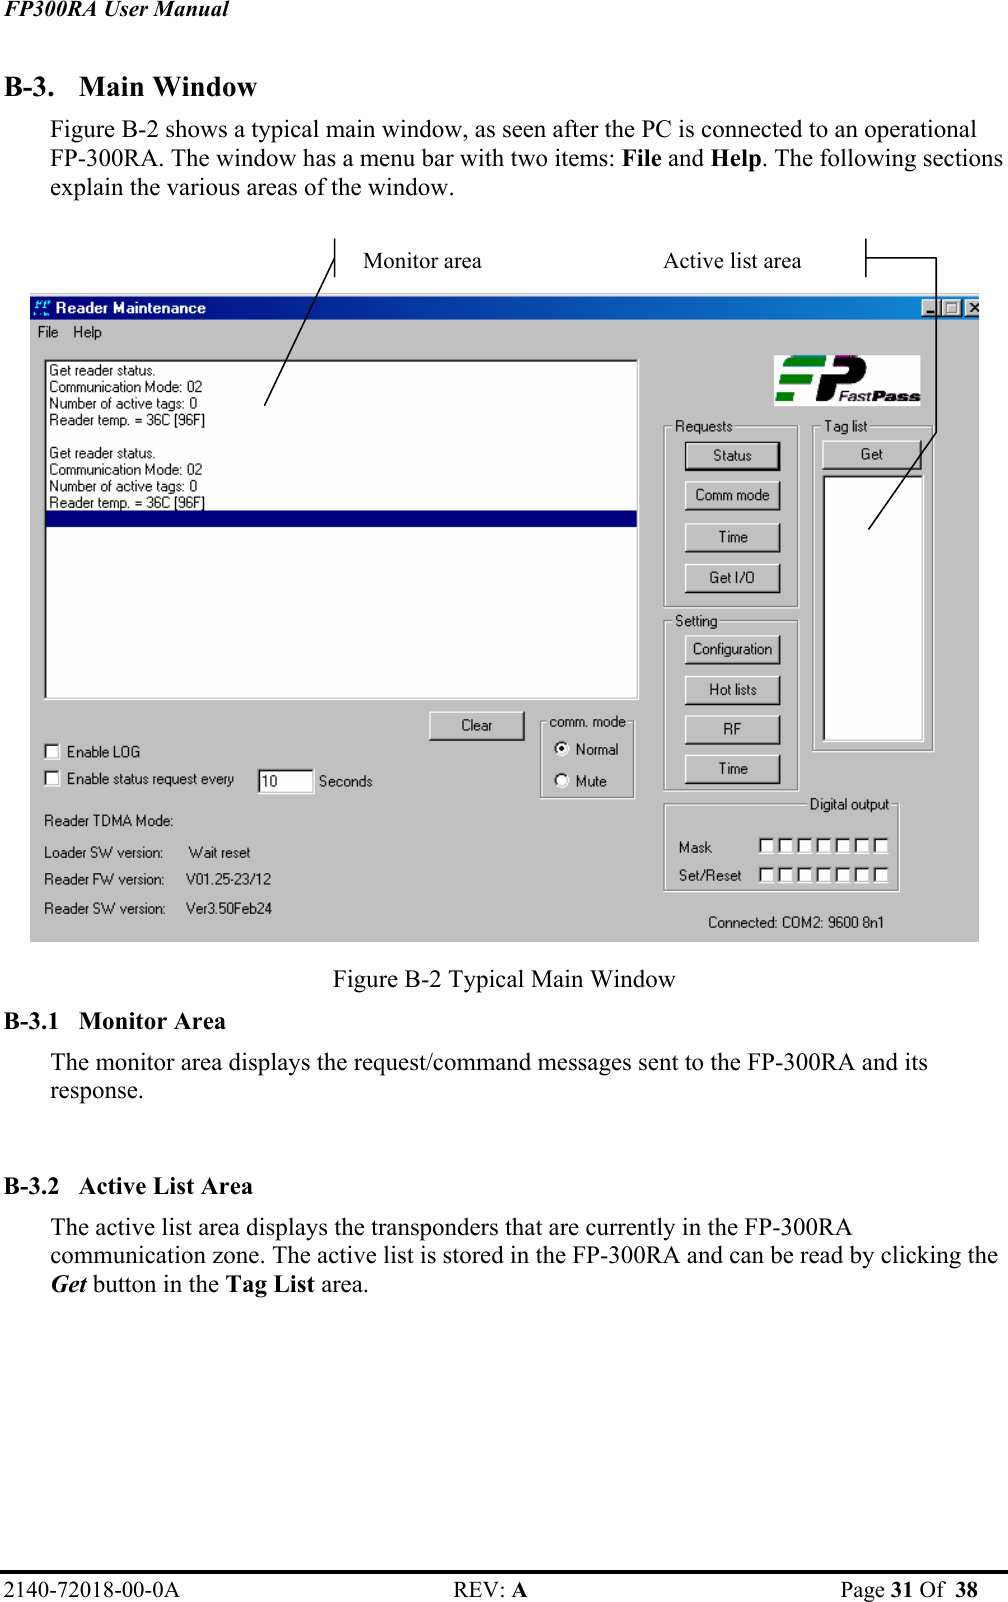 FP300RA User Manual 2140-72018-00-0A REV: A  Page 31 Of  38  B-3. Main Window Figure B-2 shows a typical main window, as seen after the PC is connected to an operational FP-300RA. The window has a menu bar with two items: File and Help. The following sections explain the various areas of the window.    Figure B-2 Typical Main Window  B-3.1 Monitor Area The monitor area displays the request/command messages sent to the FP-300RA and its response.  B-3.2 Active List Area The active list area displays the transponders that are currently in the FP-300RA communication zone. The active list is stored in the FP-300RA and can be read by clicking the Get button in the Tag List area.   Monitor areaActive list area